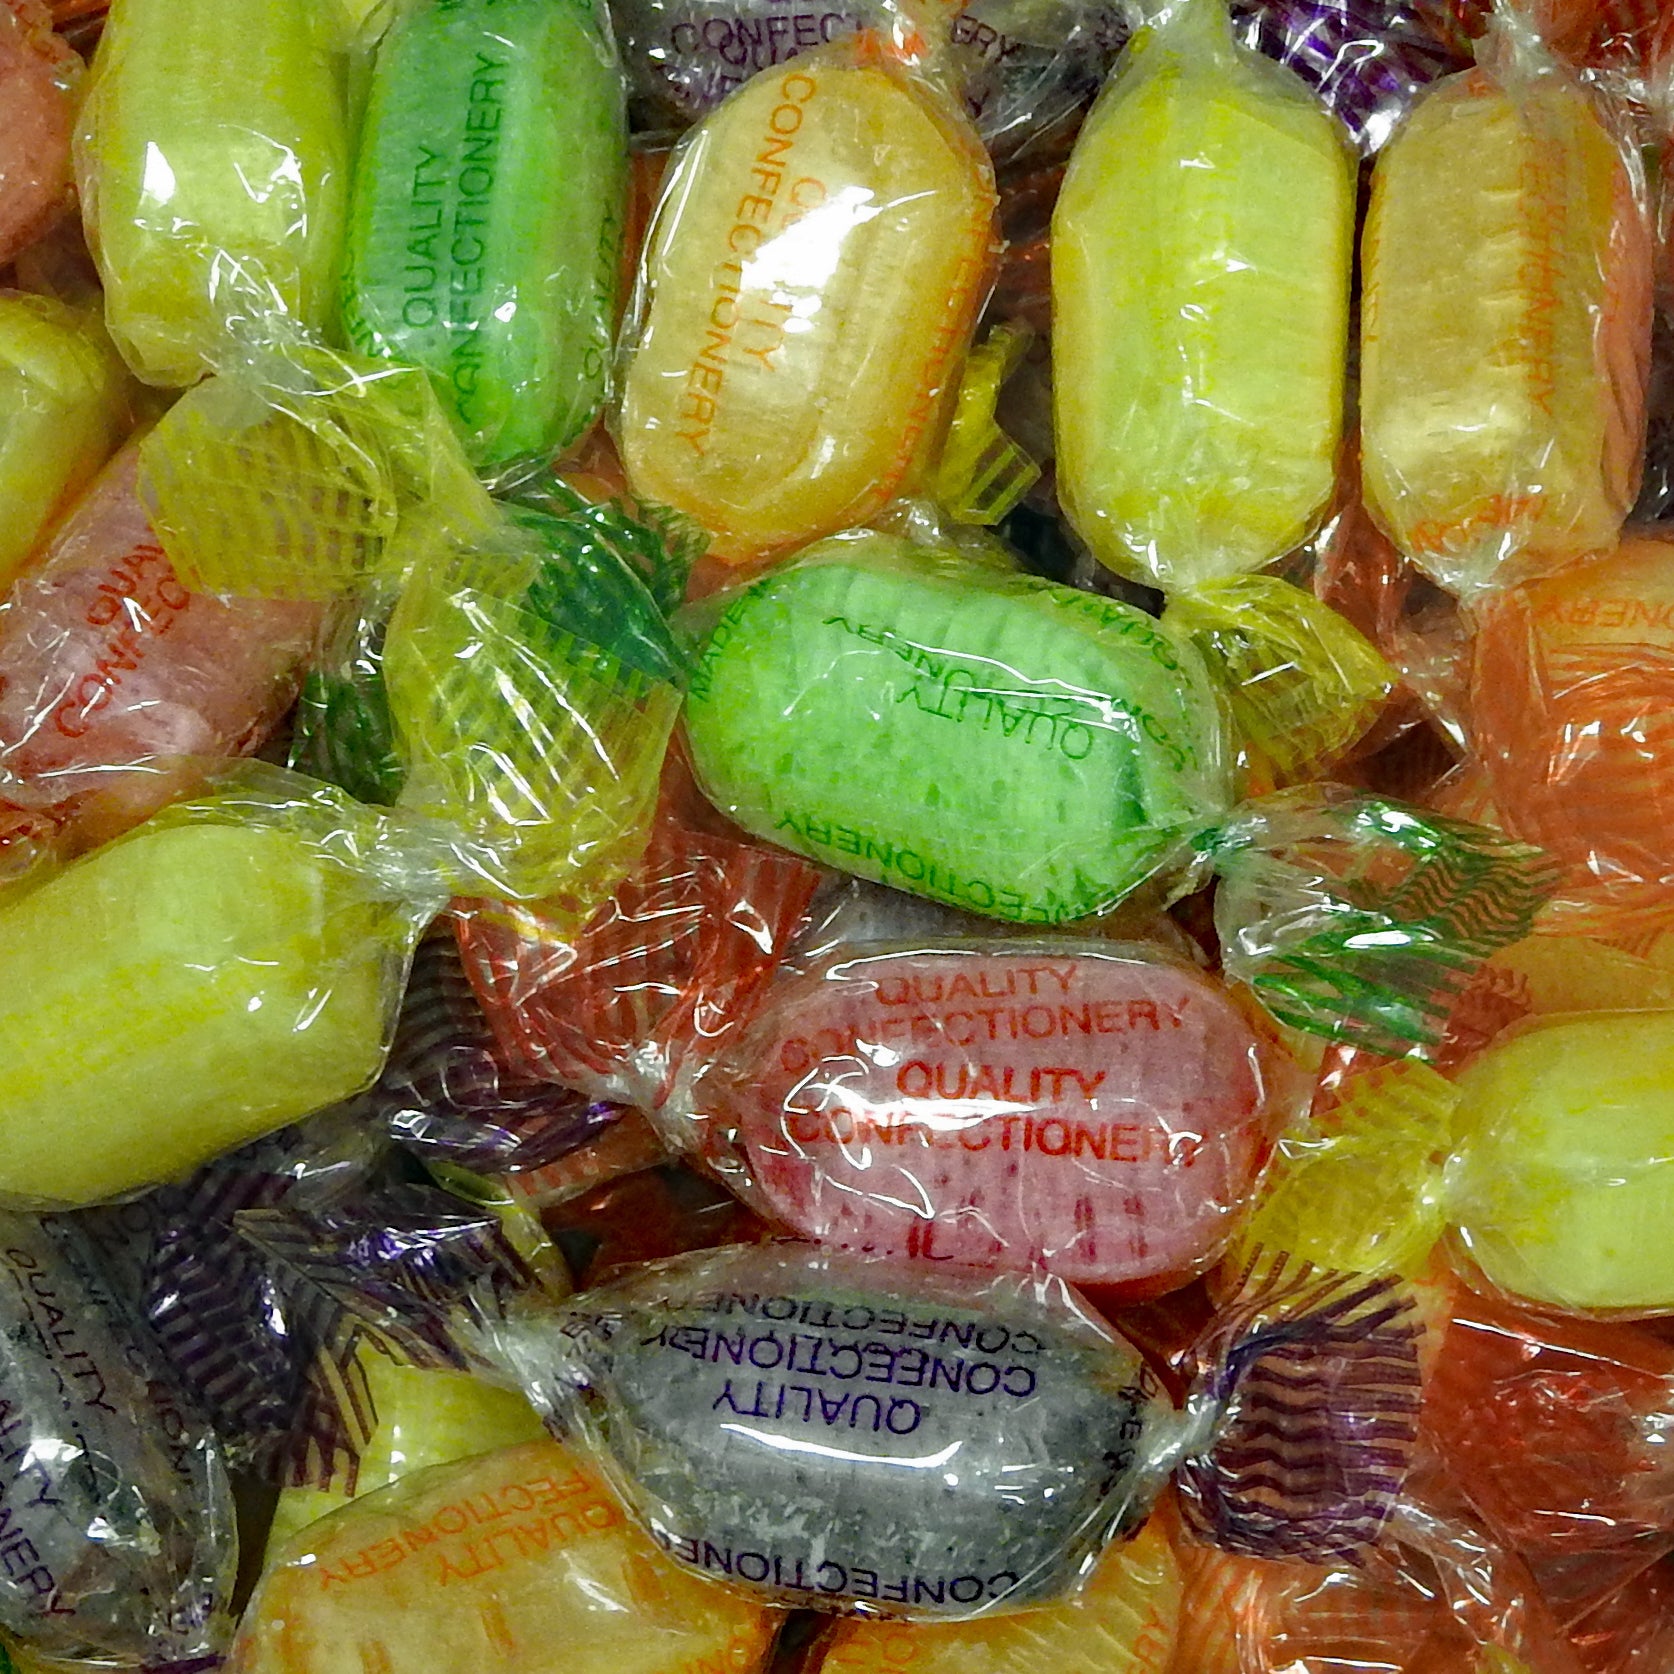 Sherbet Fruits - Retro Sweets at The Sweetie Jar